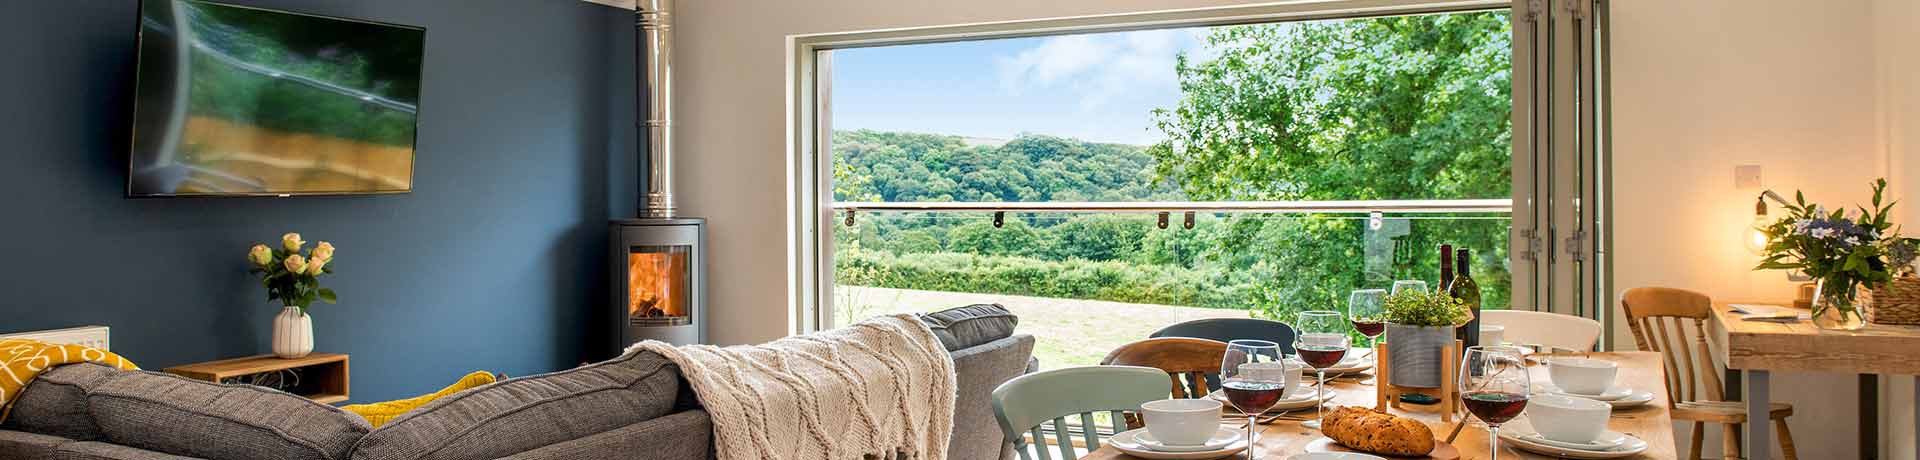 Cottages that Sleep 7 People in Dorset